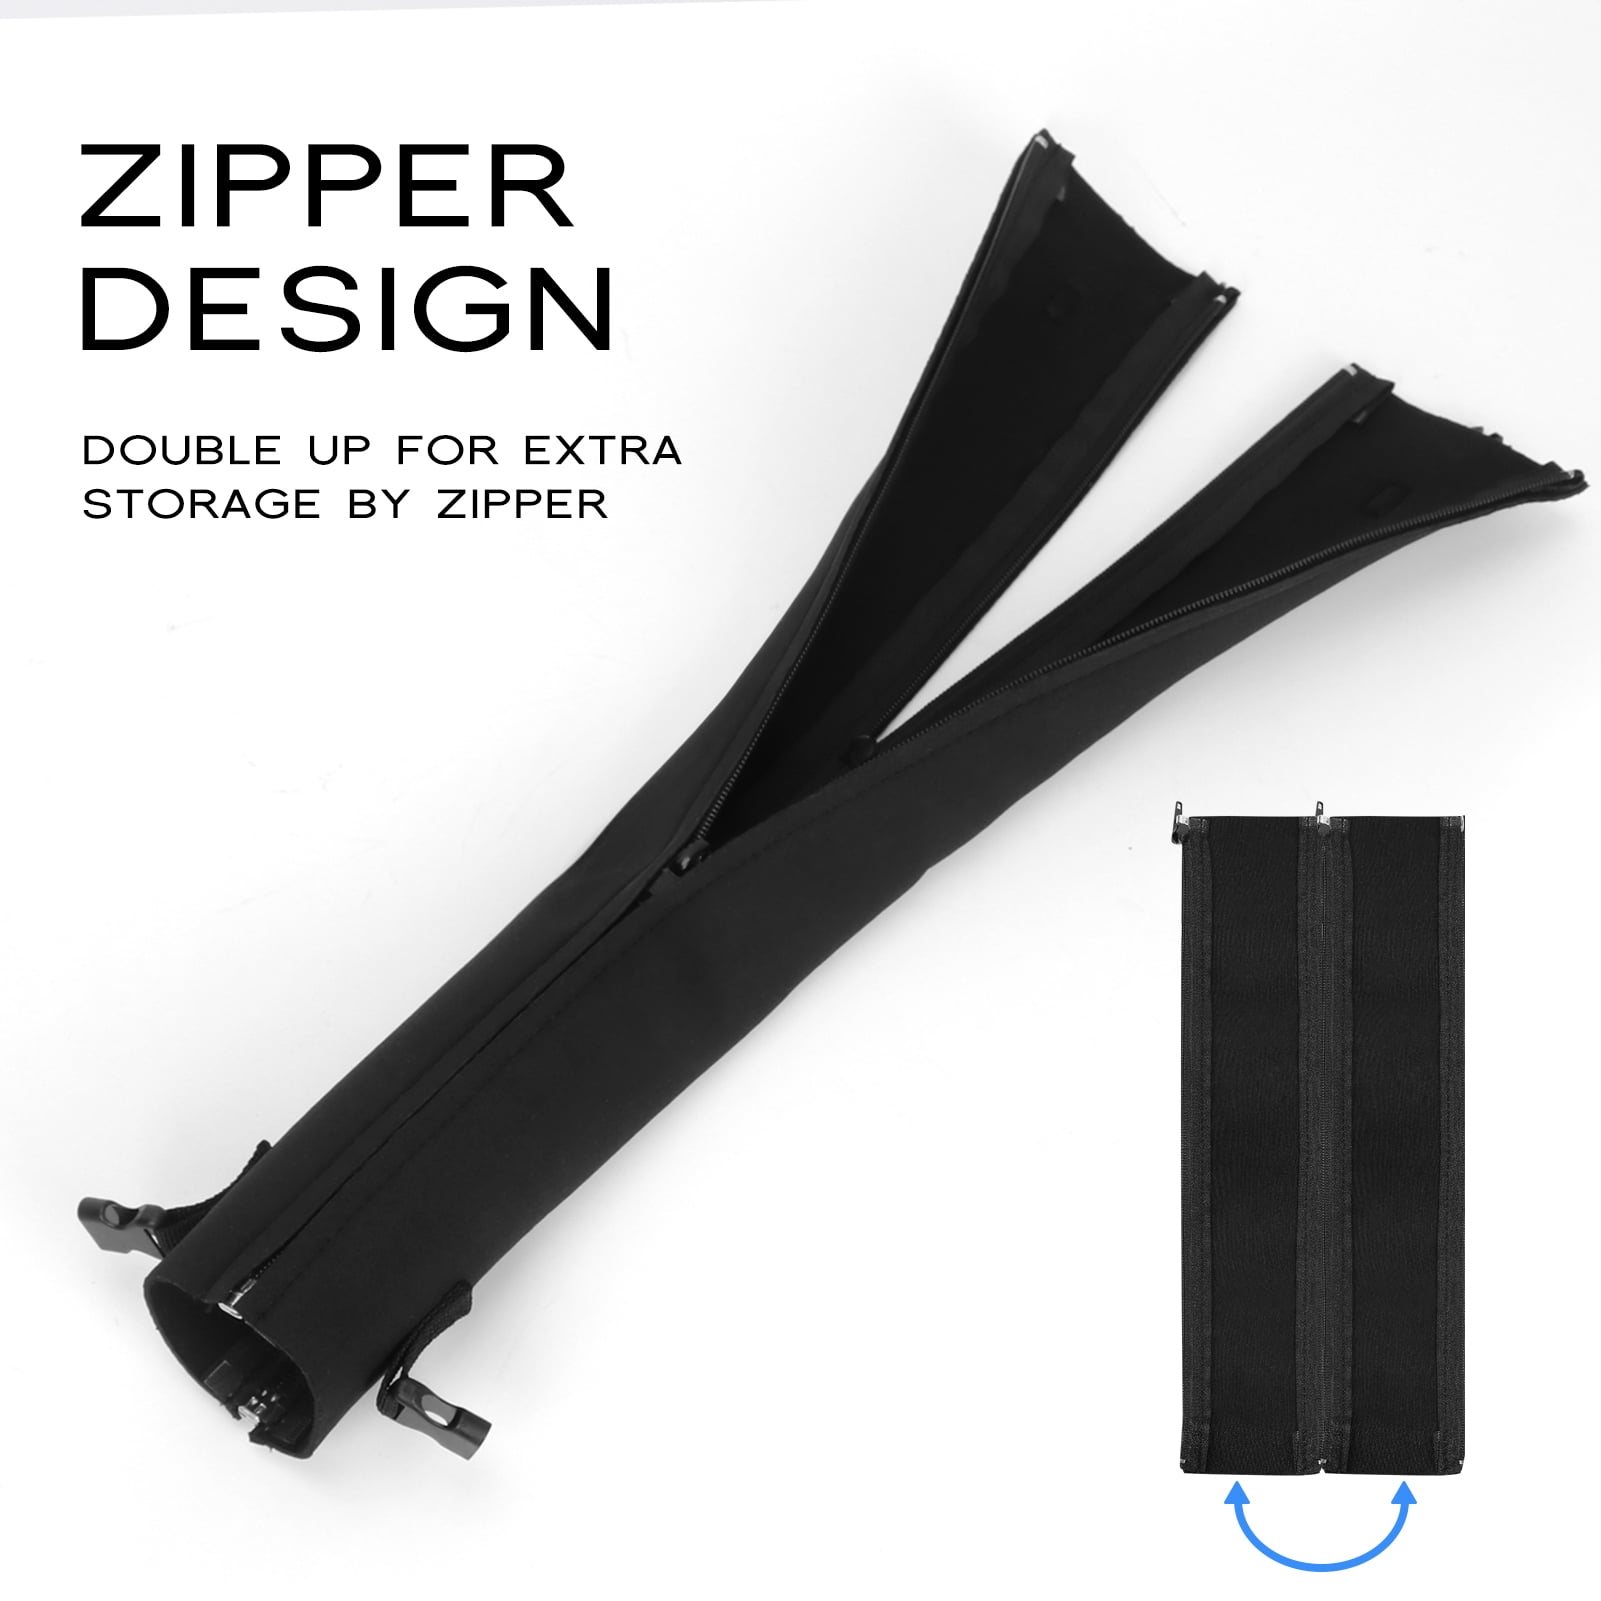 ABLEGRID 5 Pack 20 Inch Zipper Cable Management Neoprene Cord Cover Sleeve Wire  Hider Concealer Organizer Protector System for Desk TV PC Computer Home  Theater 